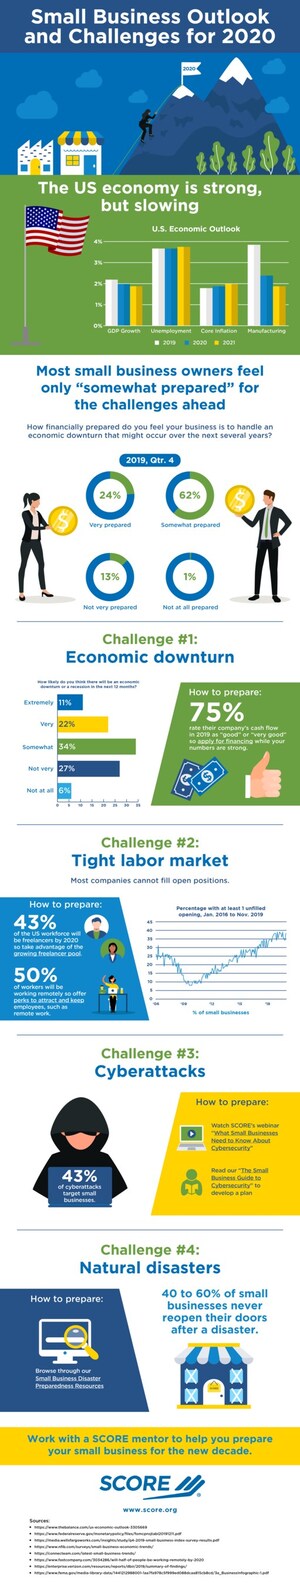 Small Business Owners Anticipate Economic Downturn in 2020; Prepare for Potential Challenges